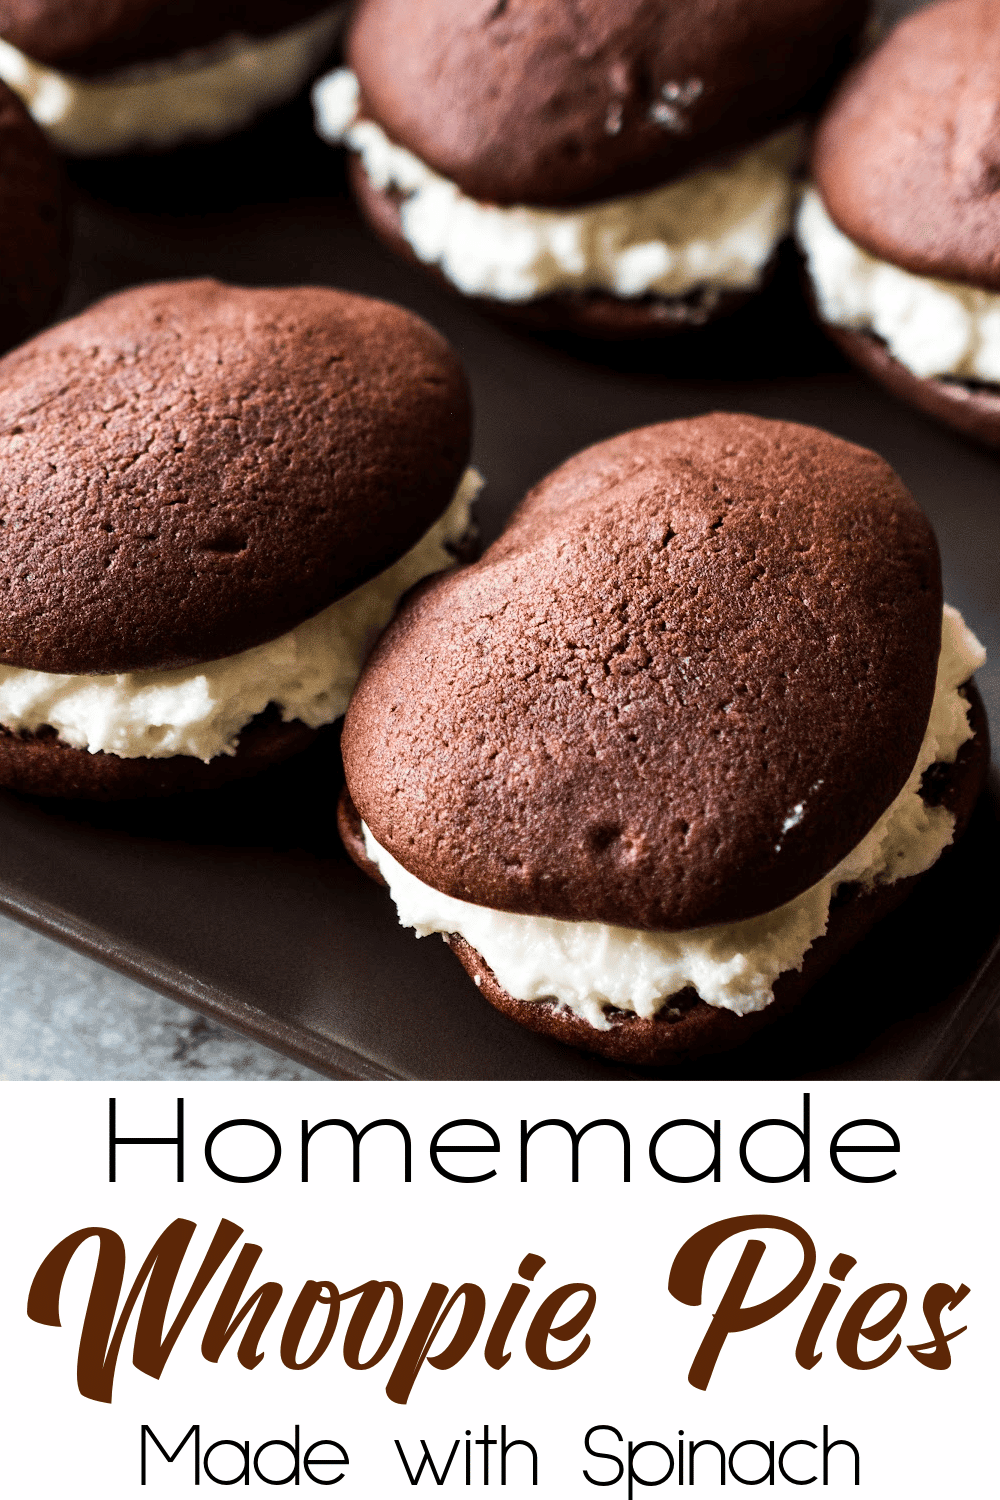 https://www.inspiringsavings.com/wp-content/uploads/2022/09/homemade-whoopies-pies-with-spinach.png